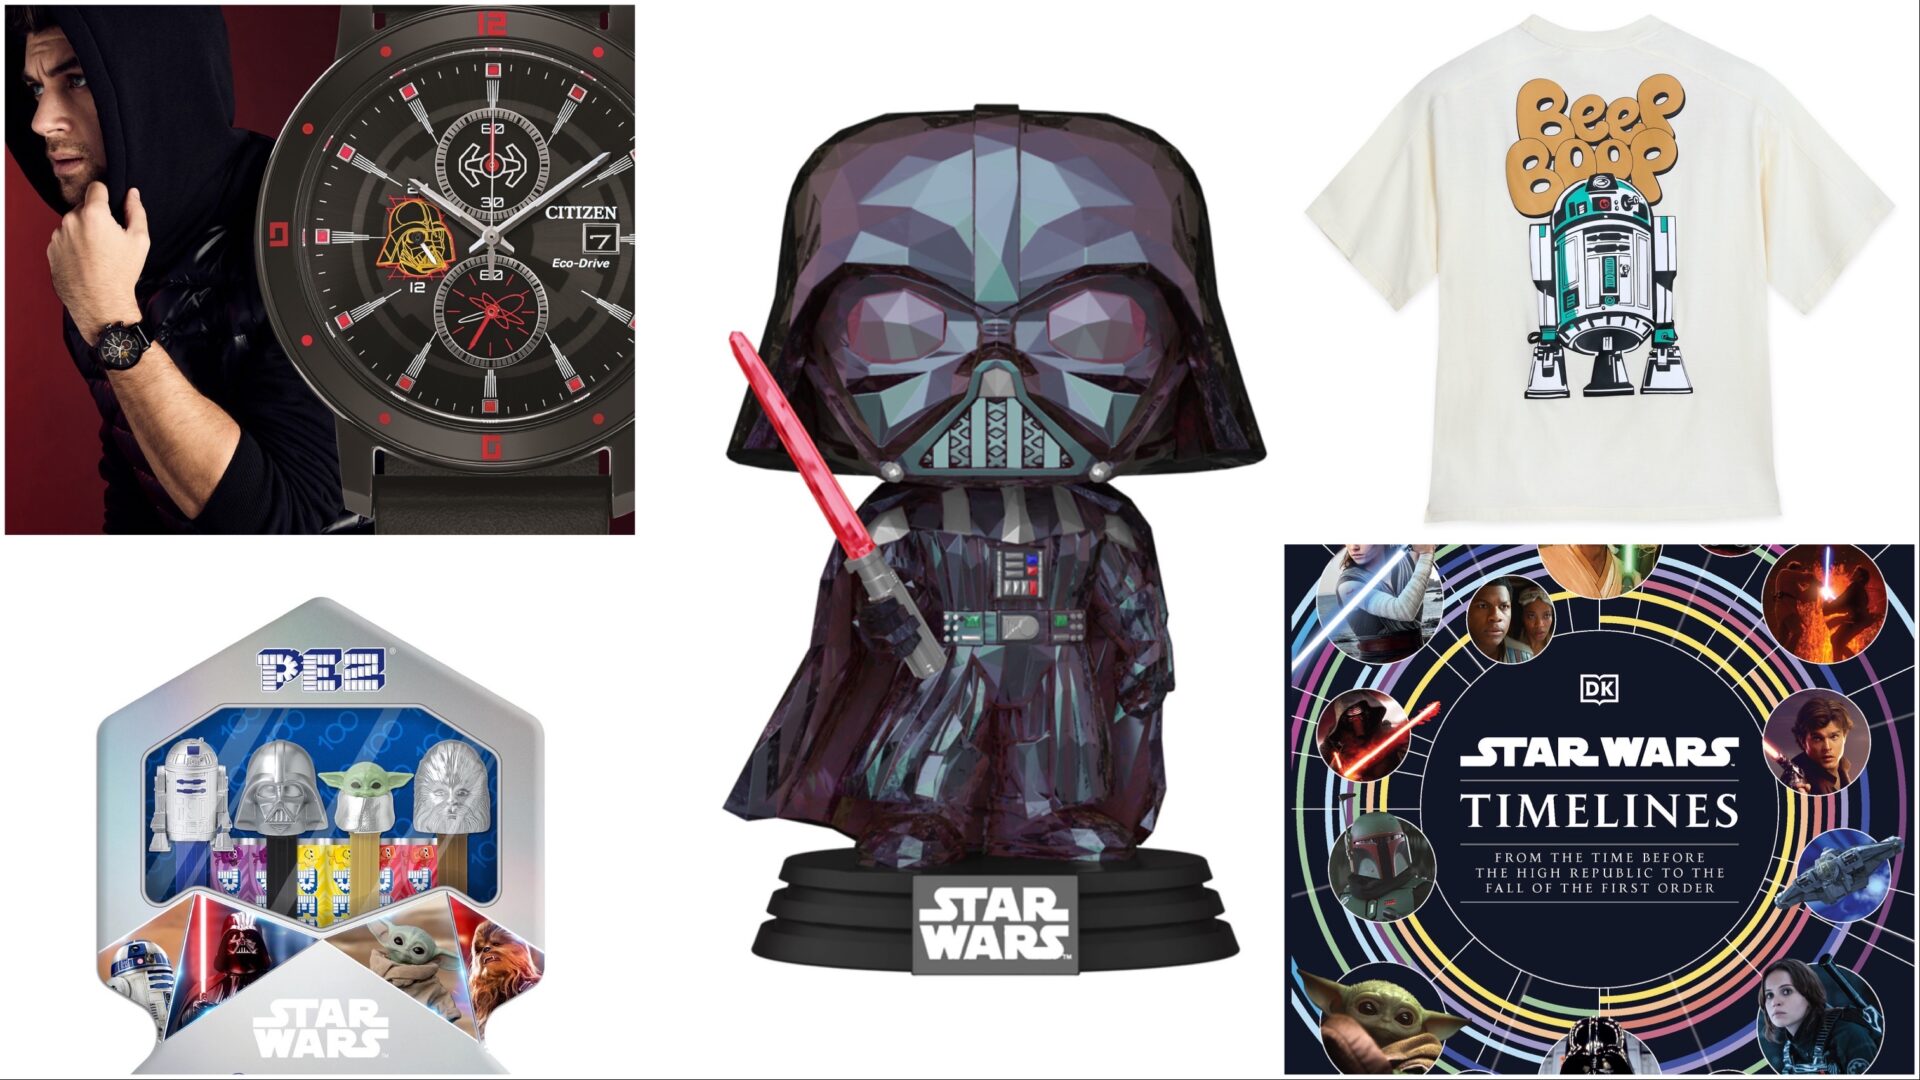 Celebrate The Wonder Of Star Wars With These New Disney100 Products!